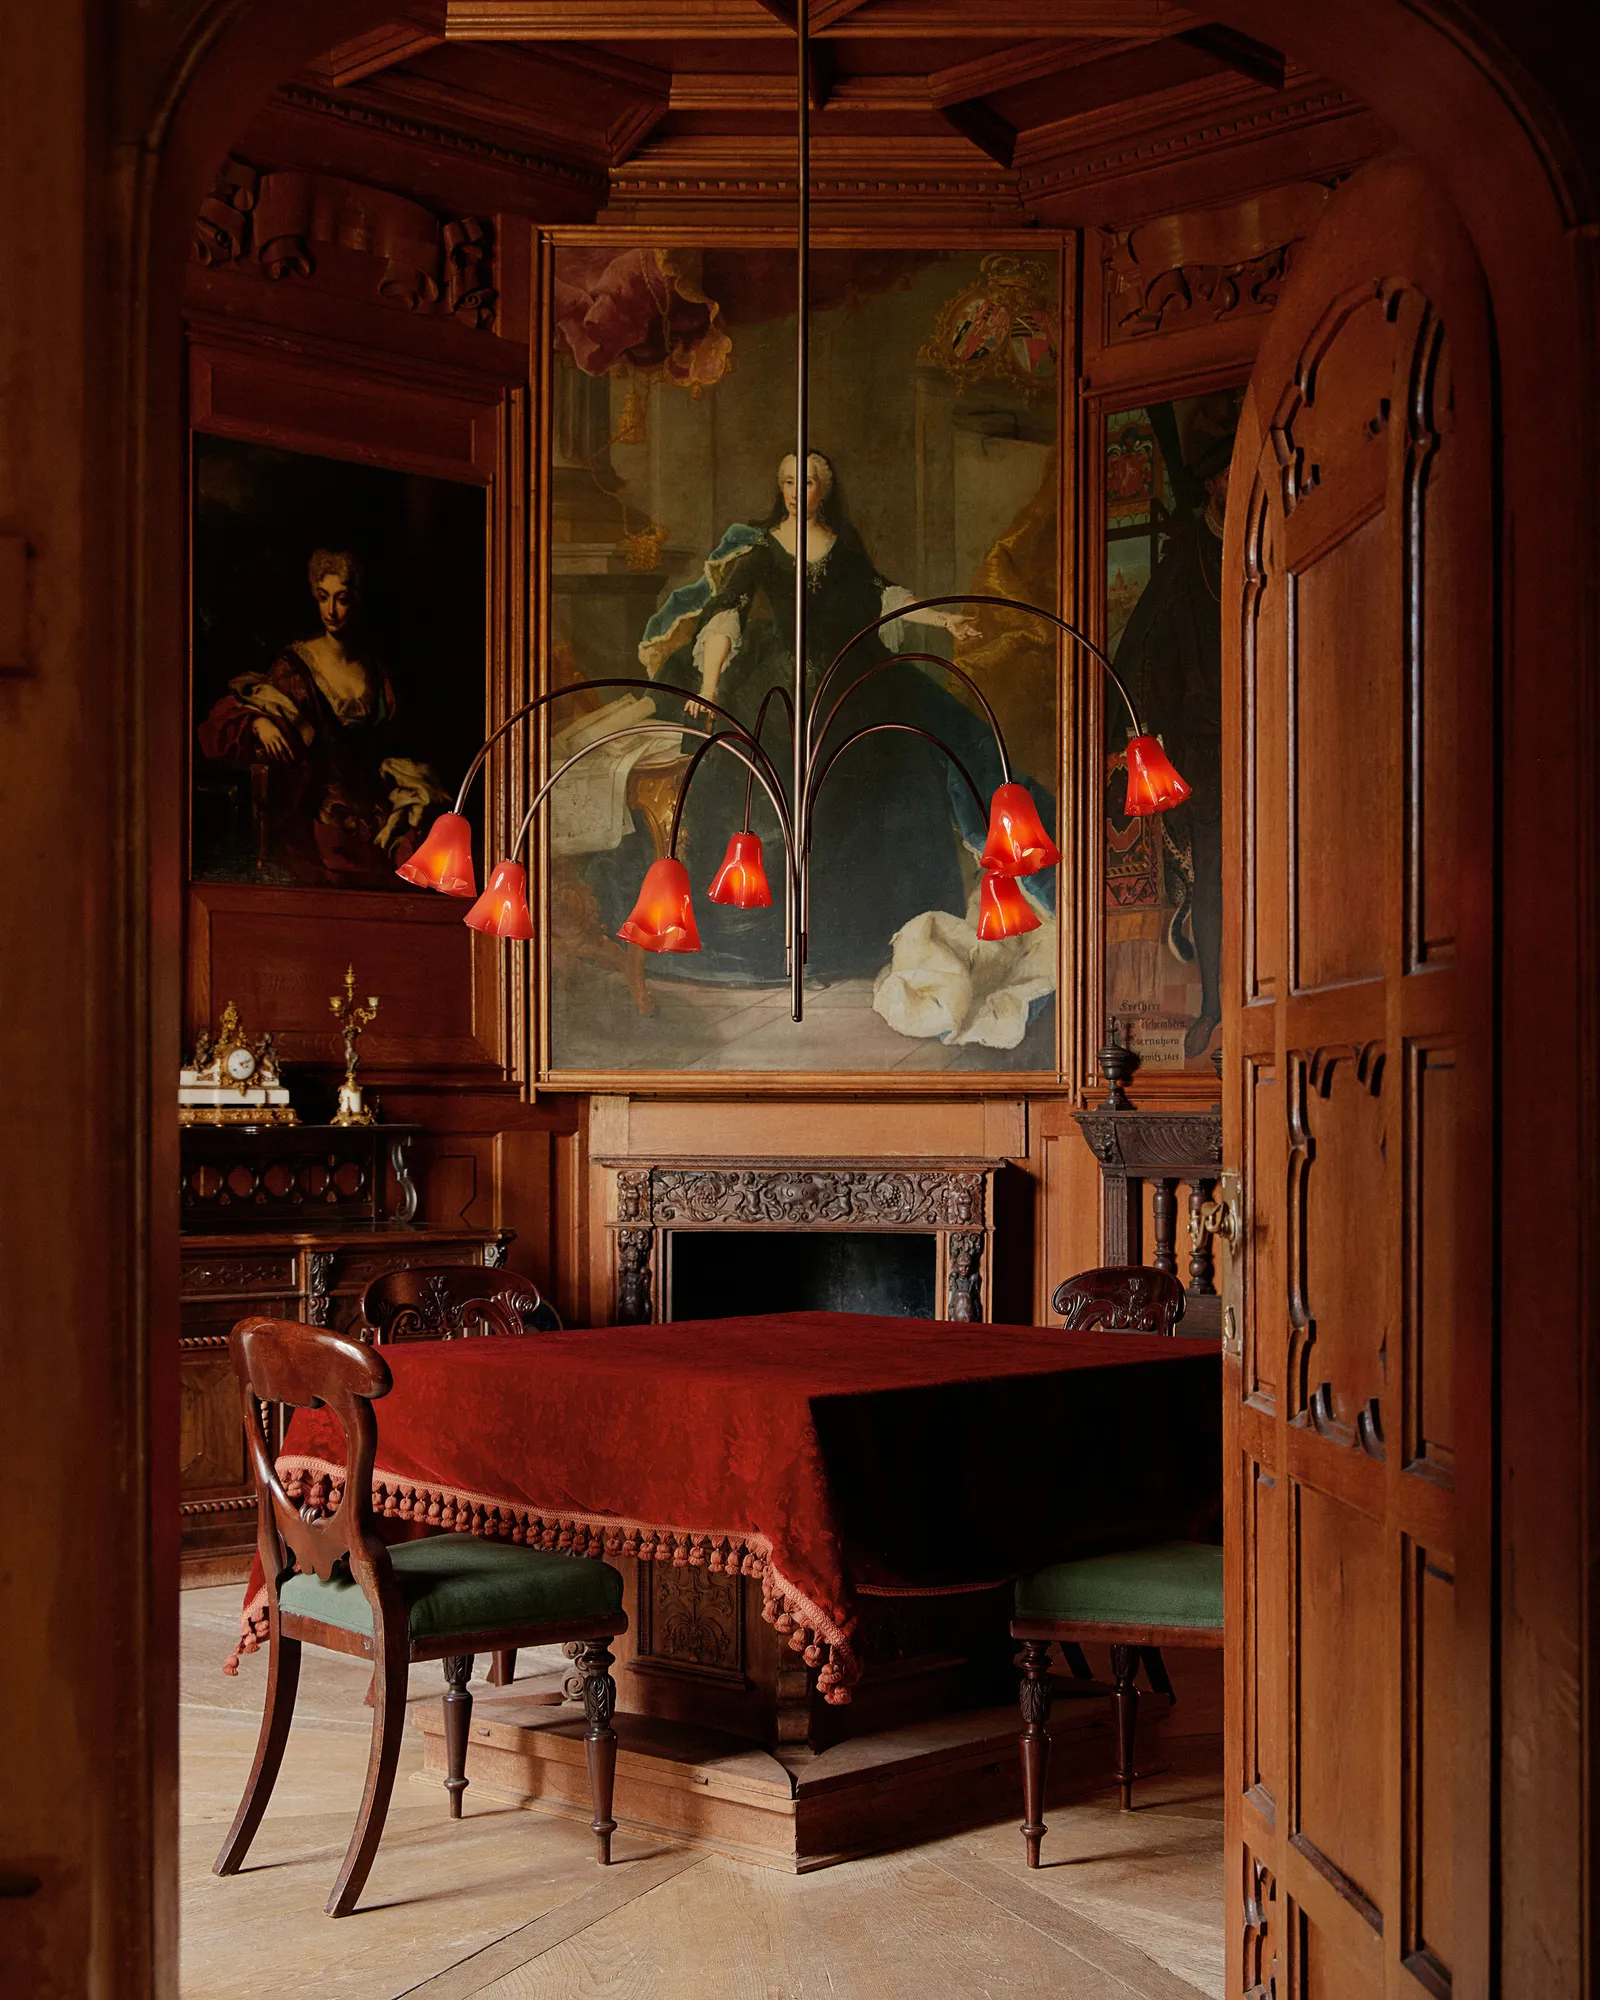 The Flora collection installed at Schloss Hollenegg, as seen in AD Photo: William Jess Laird